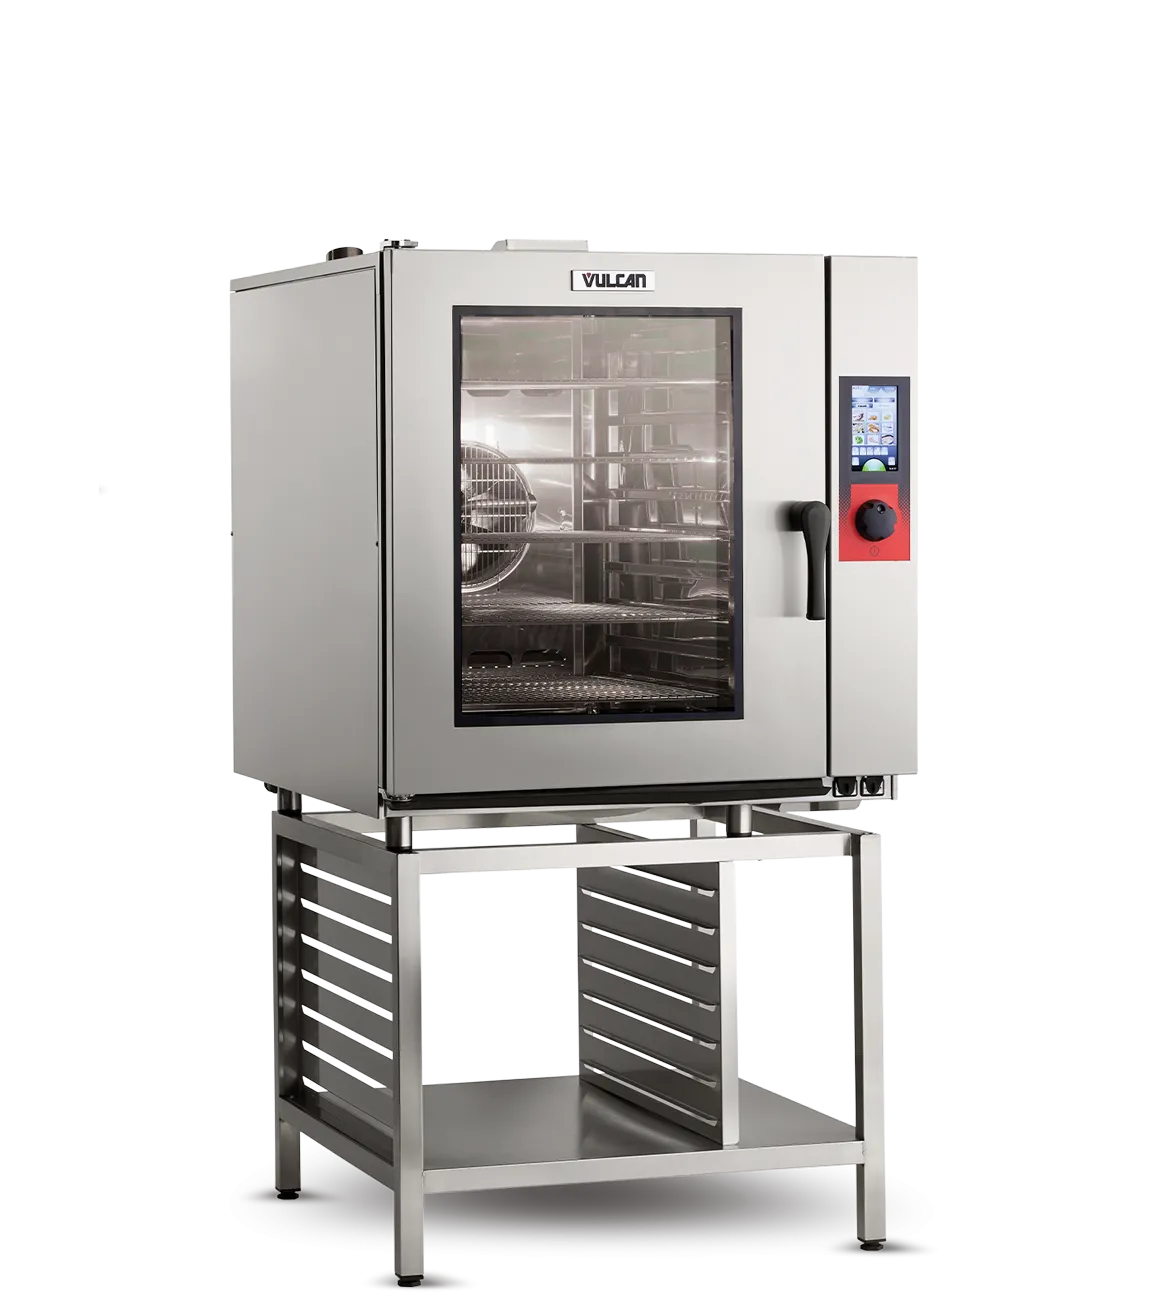 Combi Steam Ovens, Commercial Combination Steamers